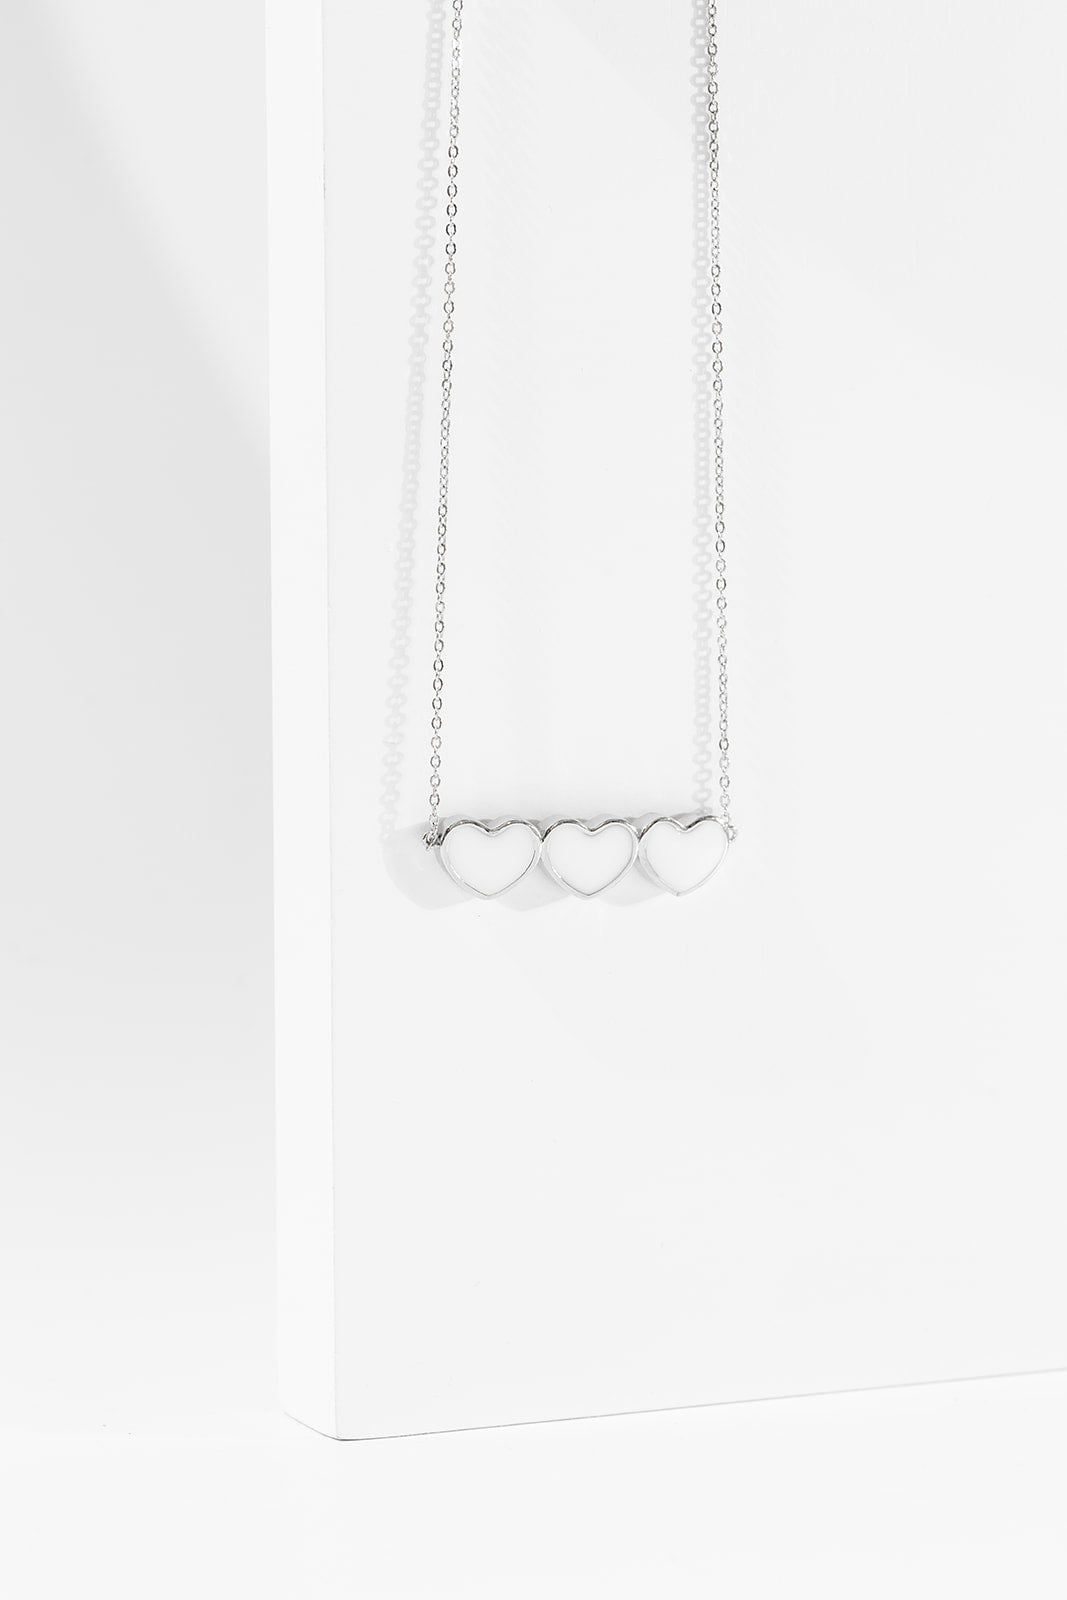 Heart strings necklace - White Gold